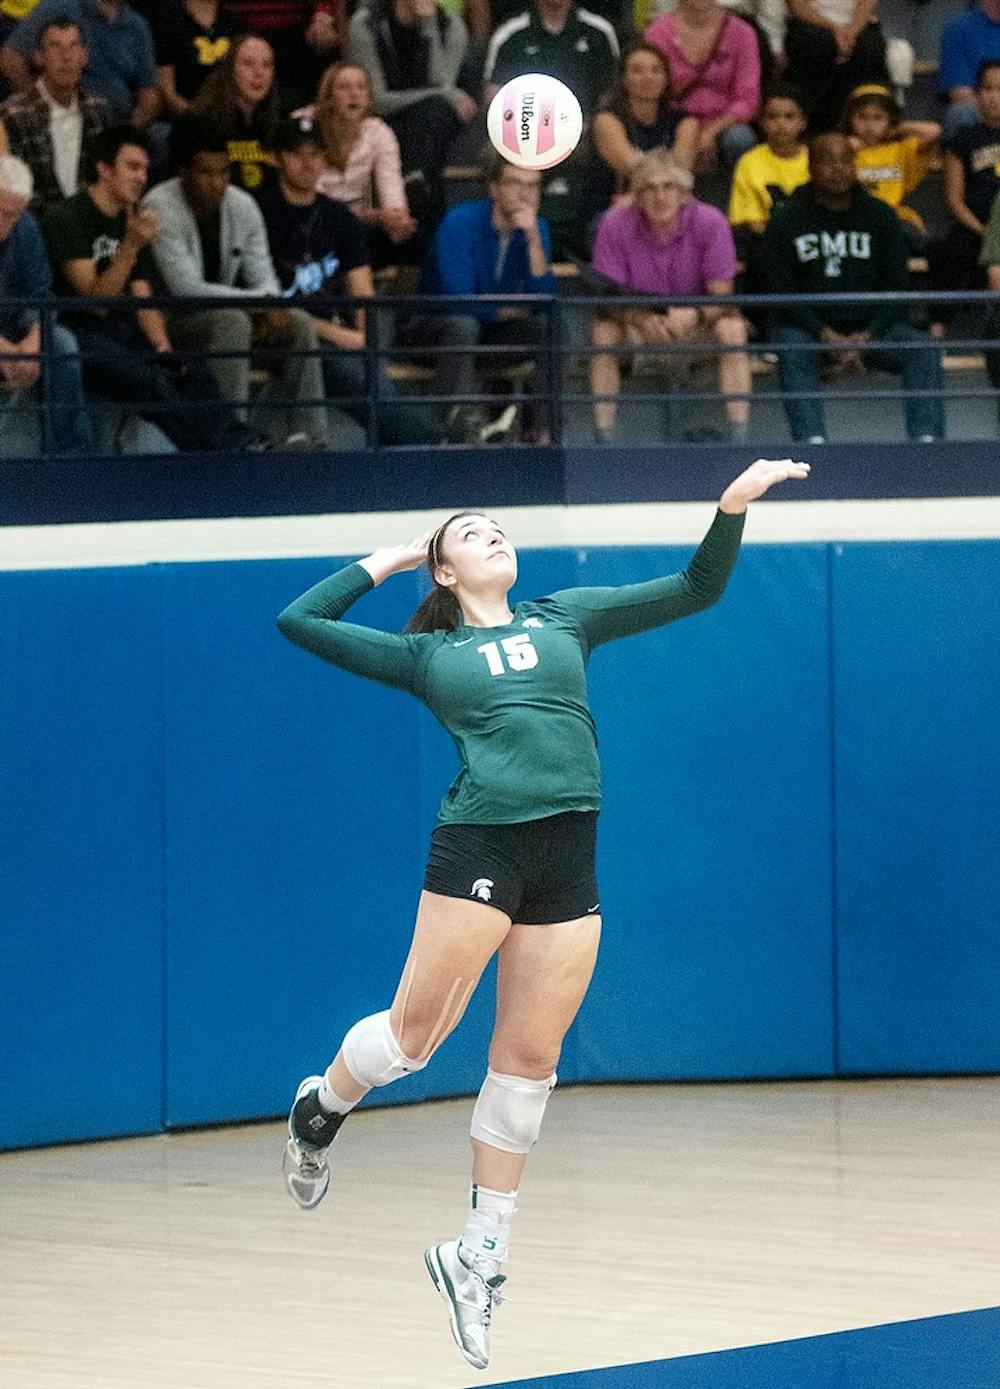 	<p>Junior outside hitter Lauren Wicinski hits a serve Wednesday night, Oct. 17, 2012, at Cliff Keen Arena in Ann Arbor, Mich. The Spartans defeated the Michigan Wolverines in three straight sets (25-20, 25-17, 25-20). Adam Toolin/The State News</p>